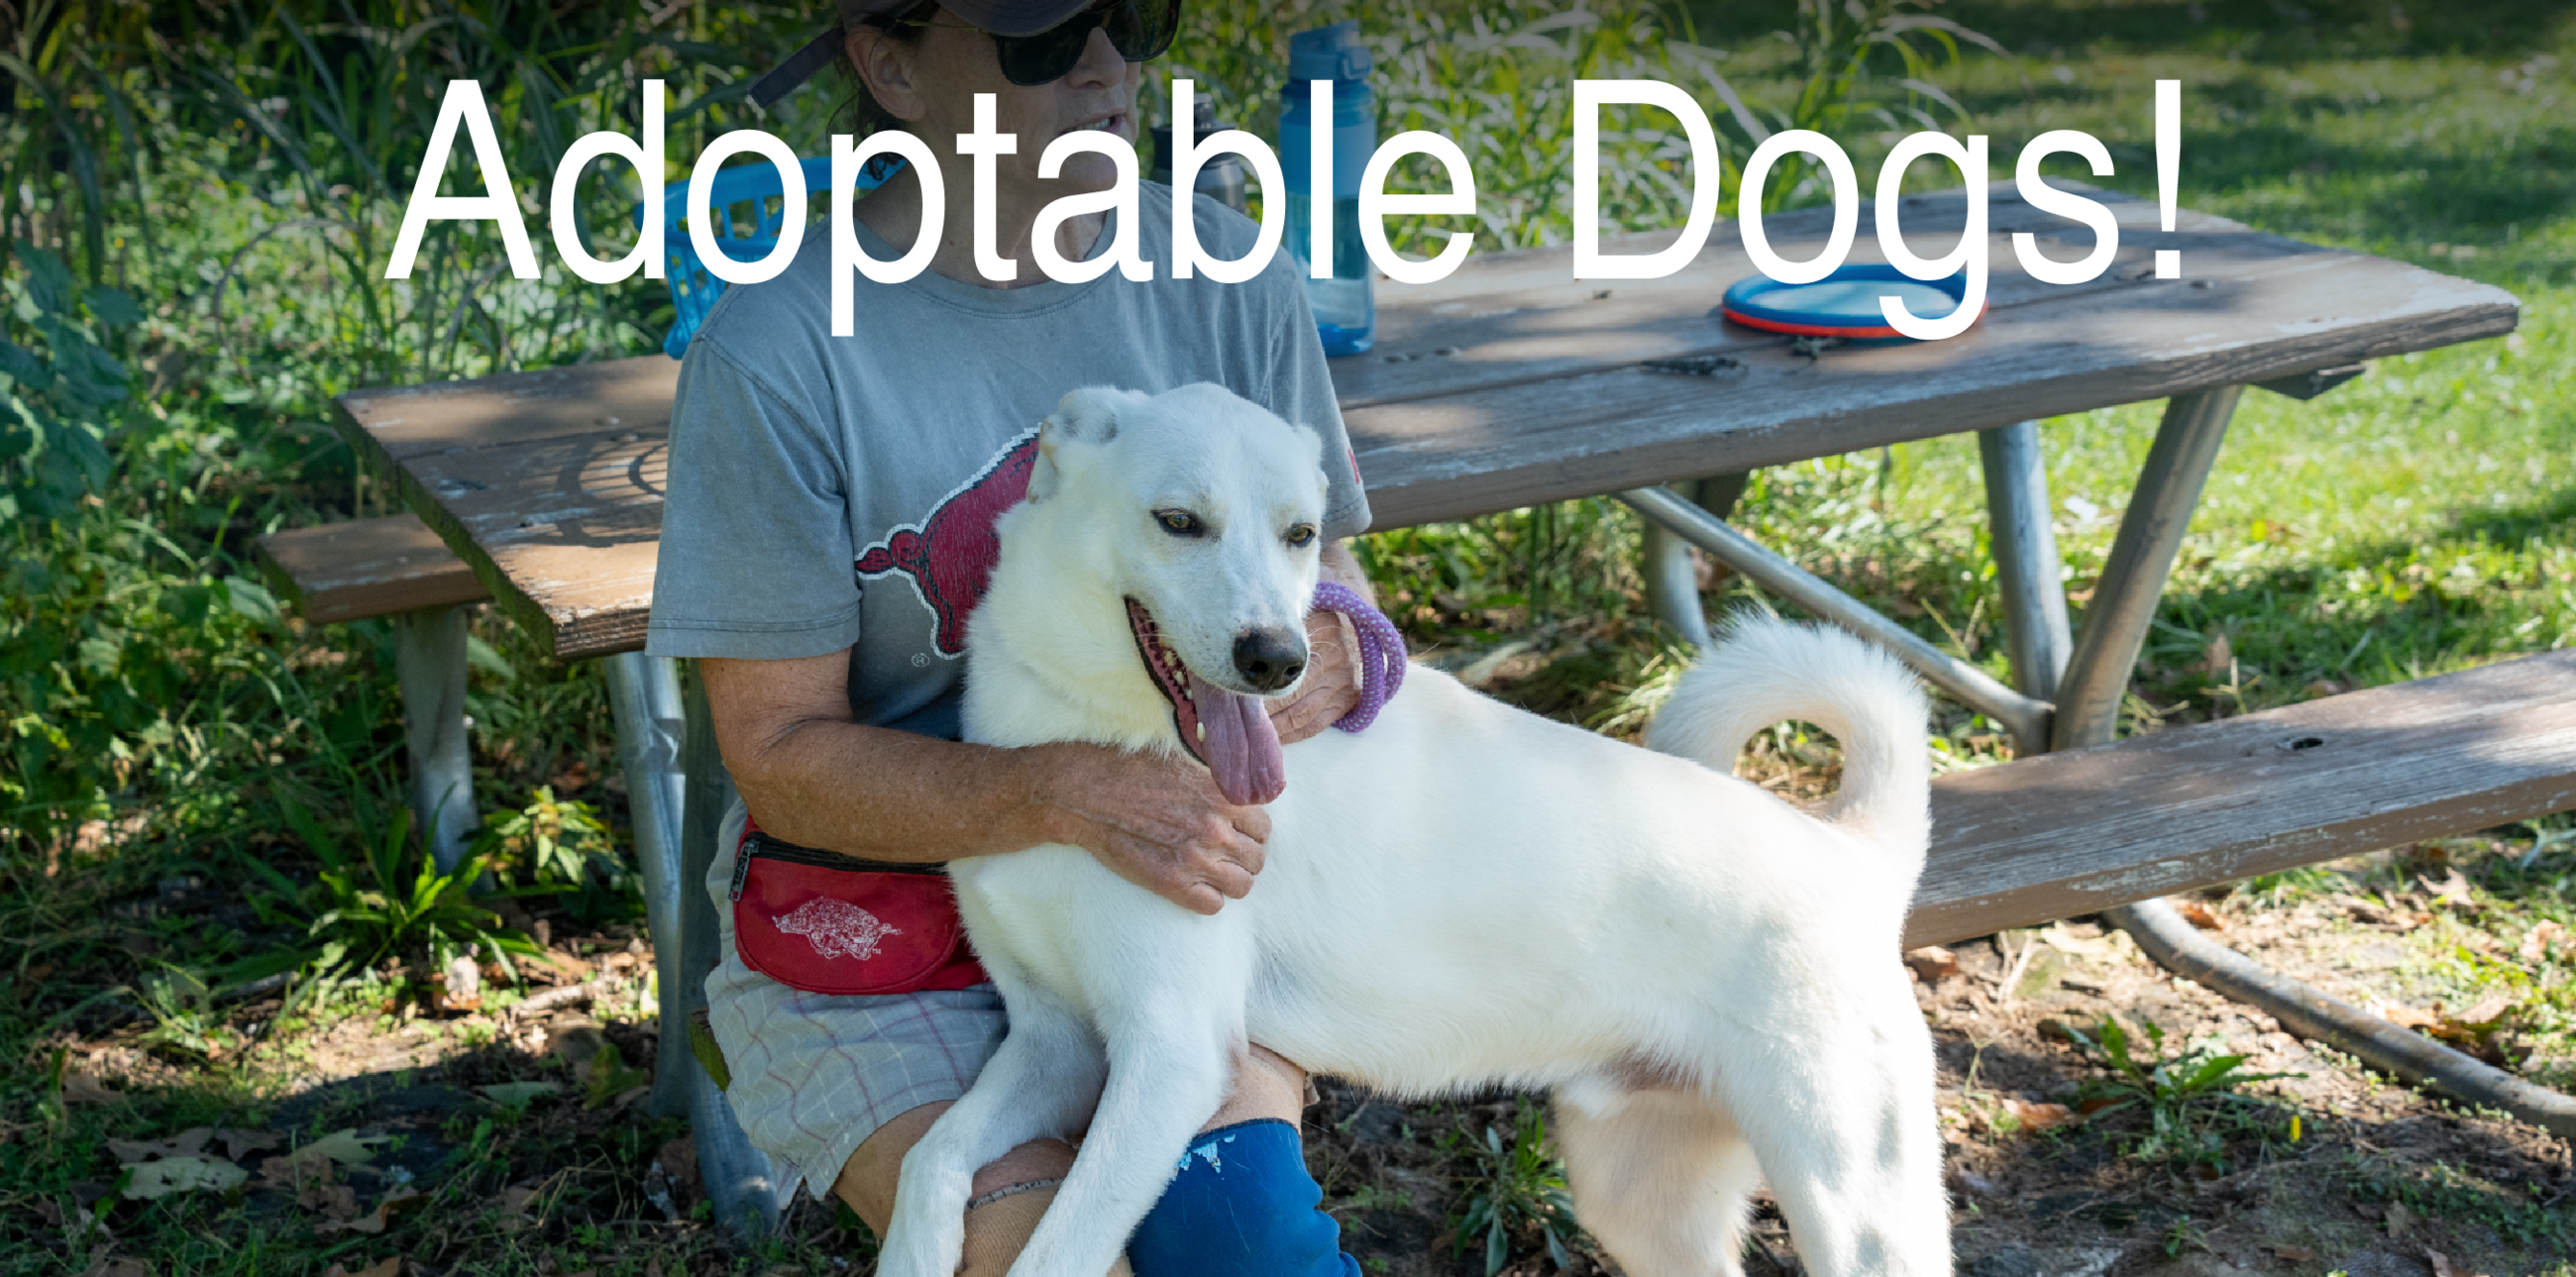 Check Out Our Adoptable Dogs